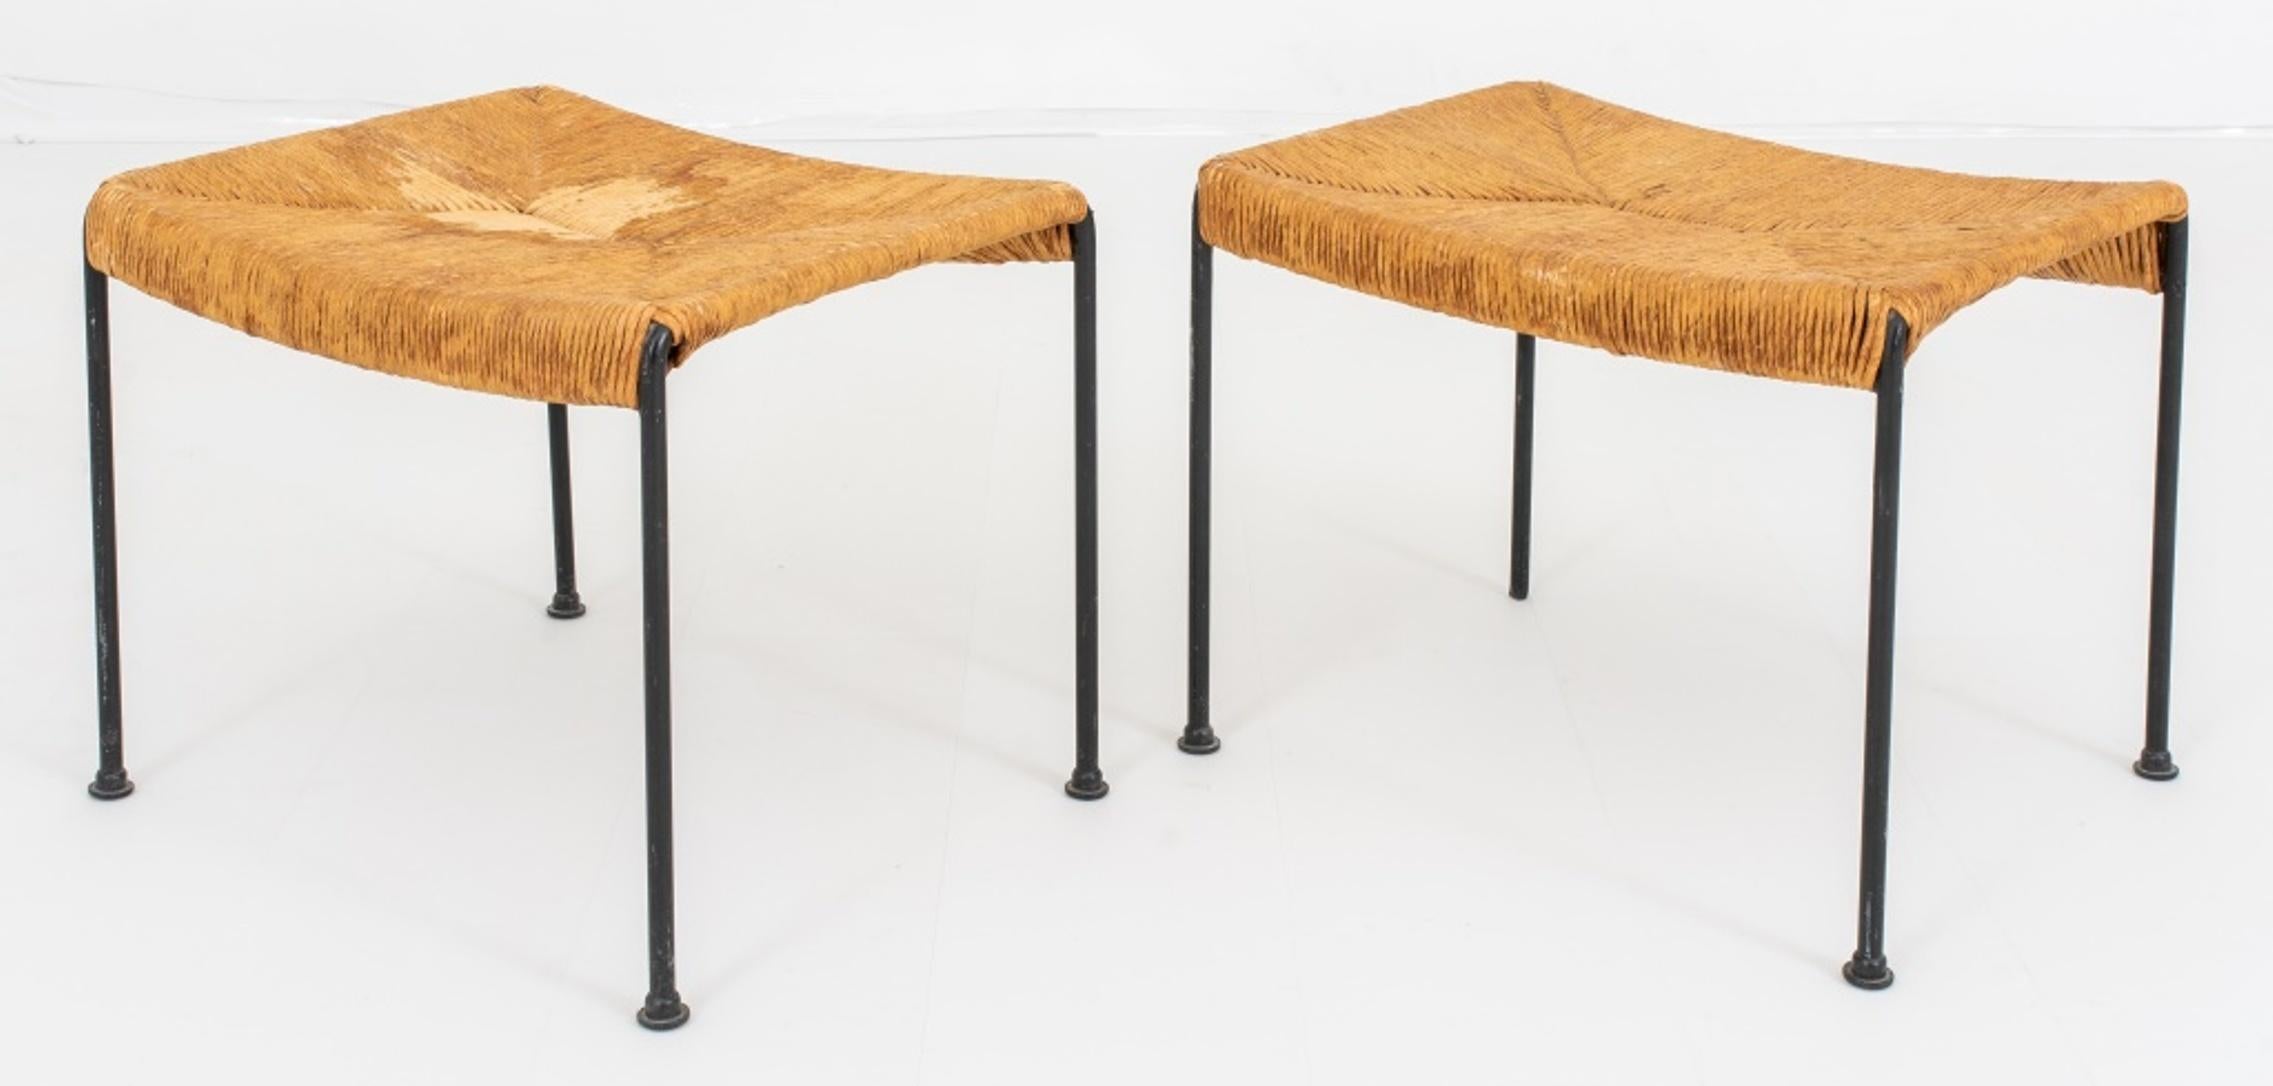 Pair of jute rope-wrapped iron benches in the manner of Paul McCobb (American, 1917-1969), rectangular with woven jute rope seats on straight wrought iron legs. 

Dealer: S138XX